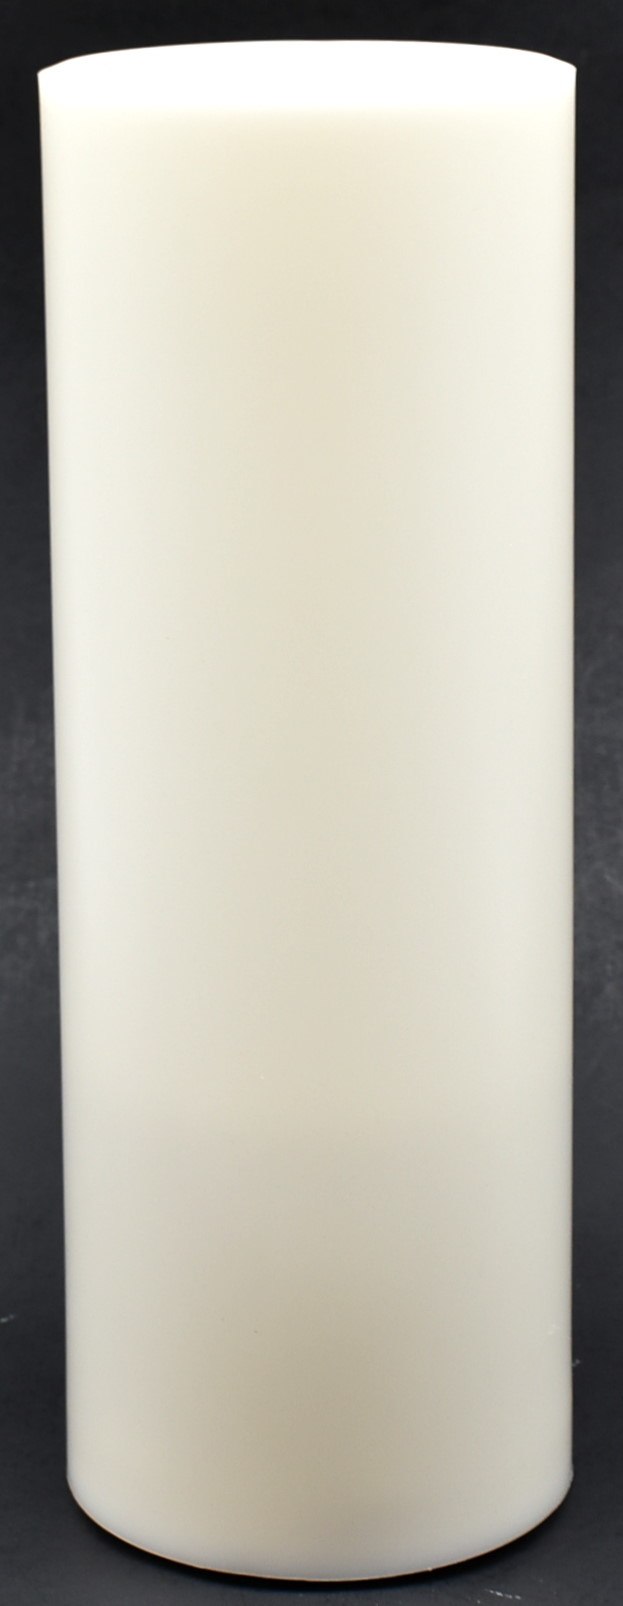 CANDLE, FLAMELESS, 3.25X9, WHITE,  OUTDOOR, PLASTIC, NO SHRINKWRAP